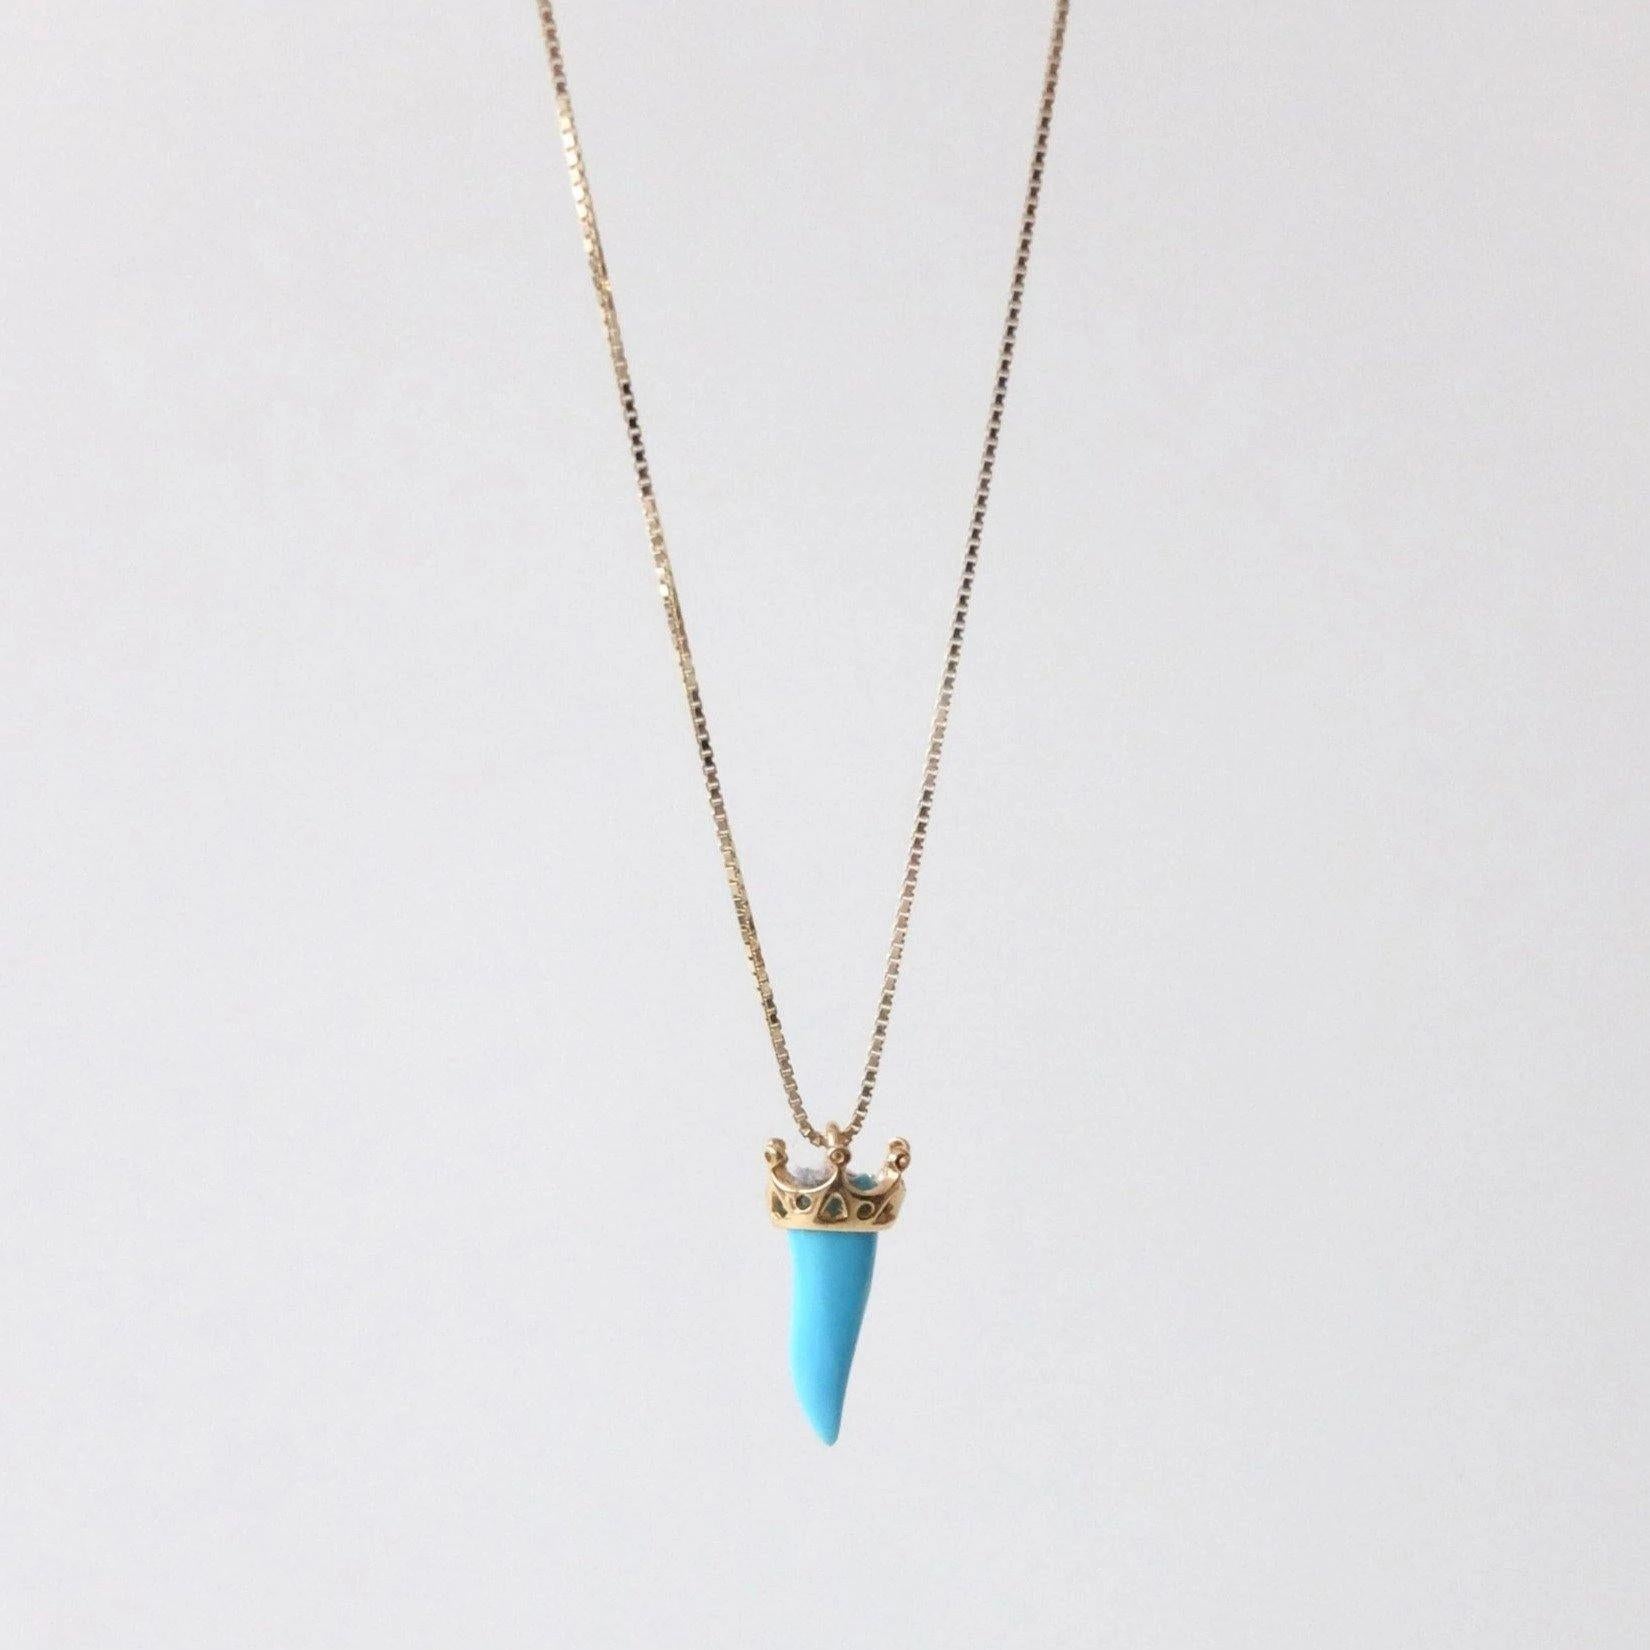 Our porte bonheur.

The Prince necklace, trendy and auspicious to wear, perfect as a gift idea.

925 silver
light blue coral
